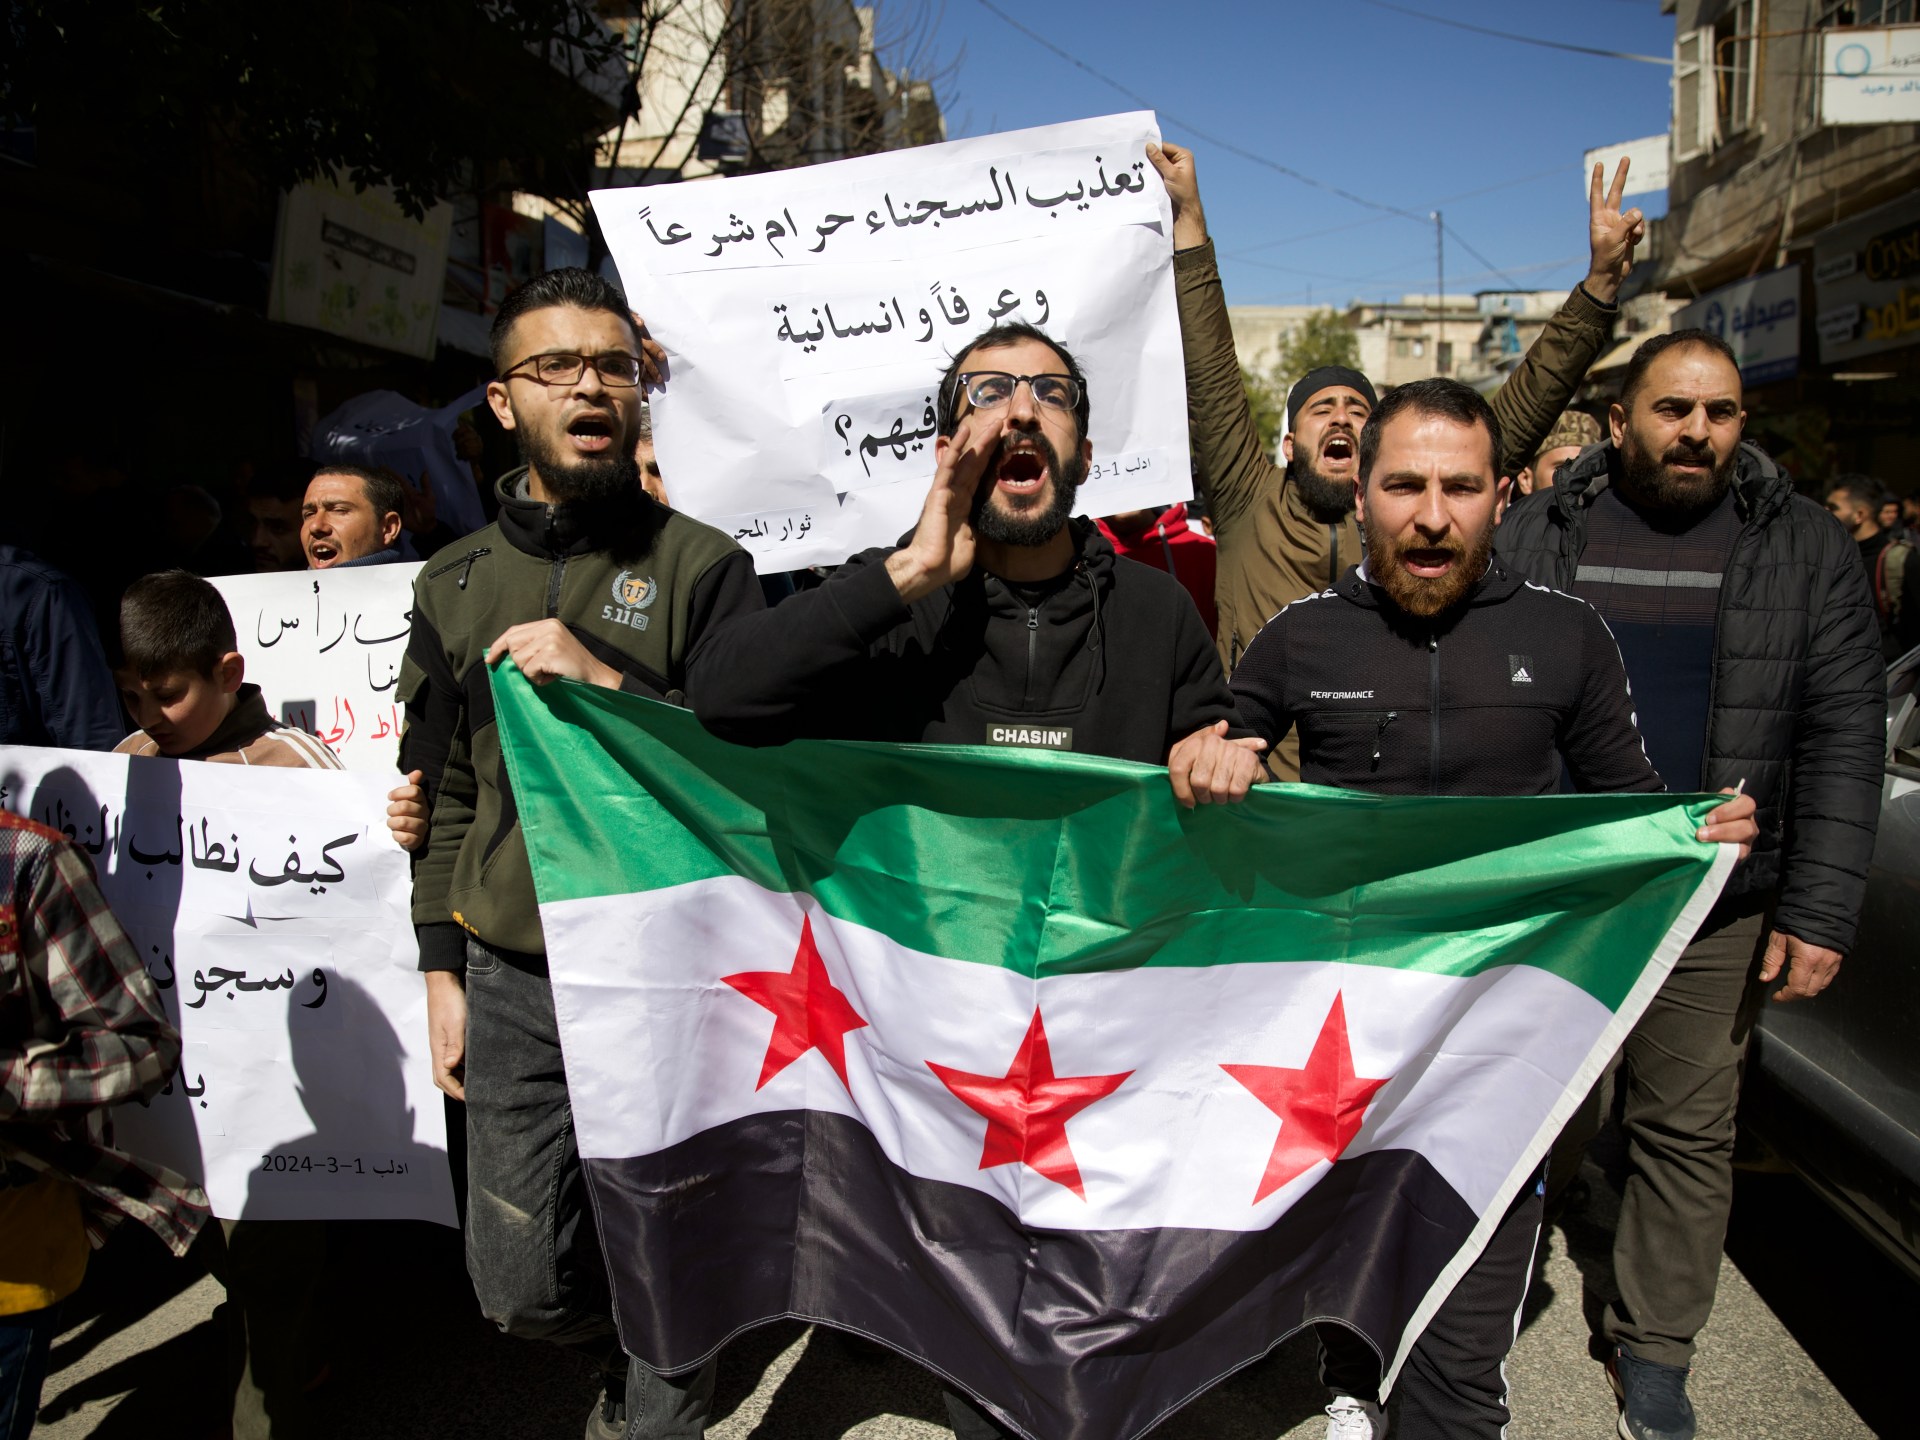 Anti-Assad Syrians lead protests against prison torture by rebel group